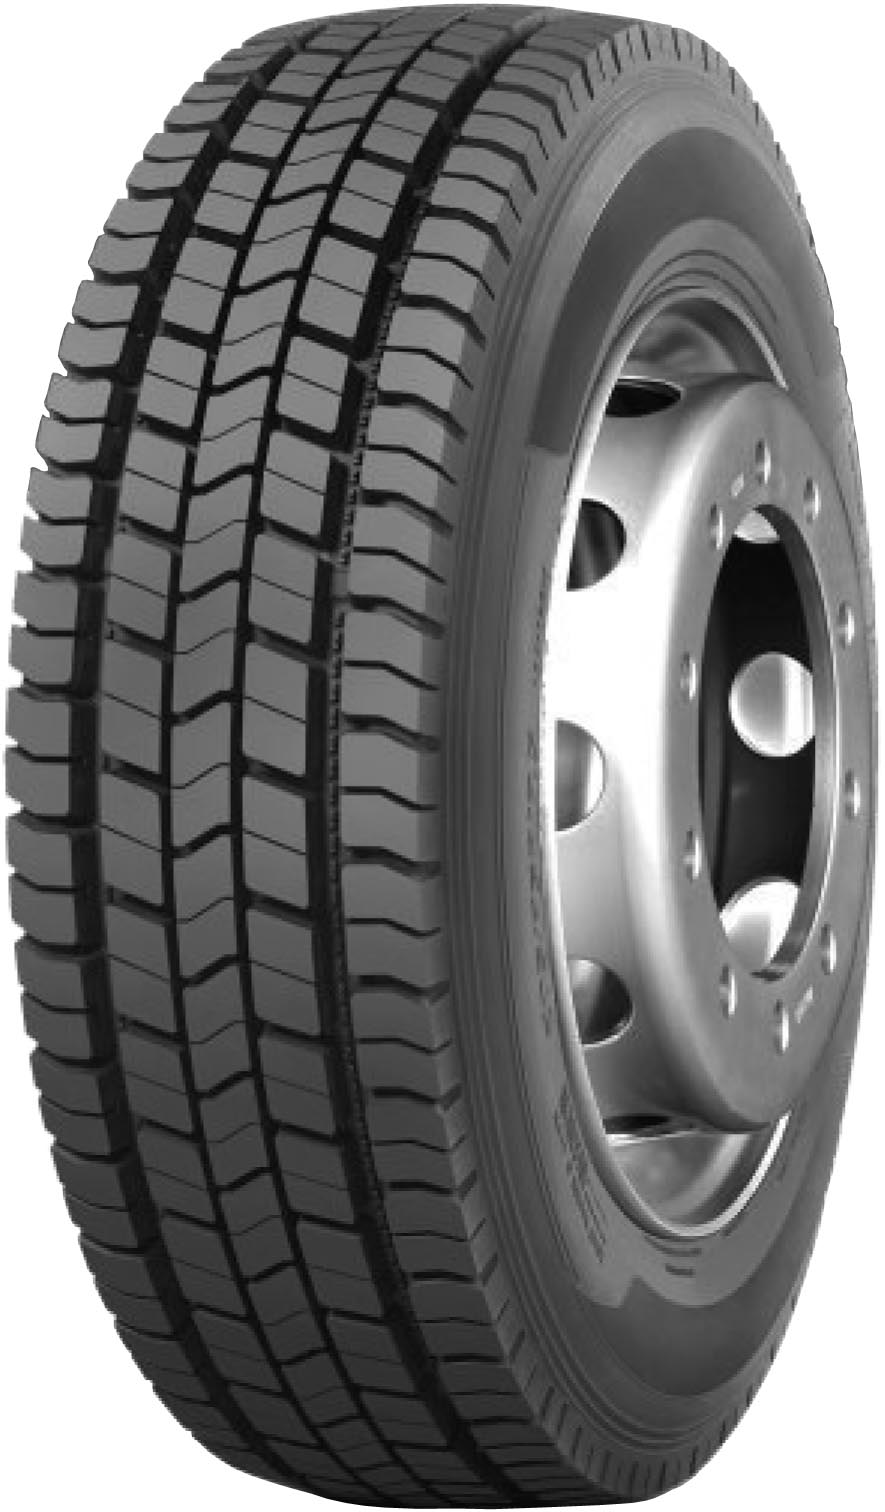 product_type-heavy_tires TRAZANO TDR+1 14 TL 215/75 R17.5 128M